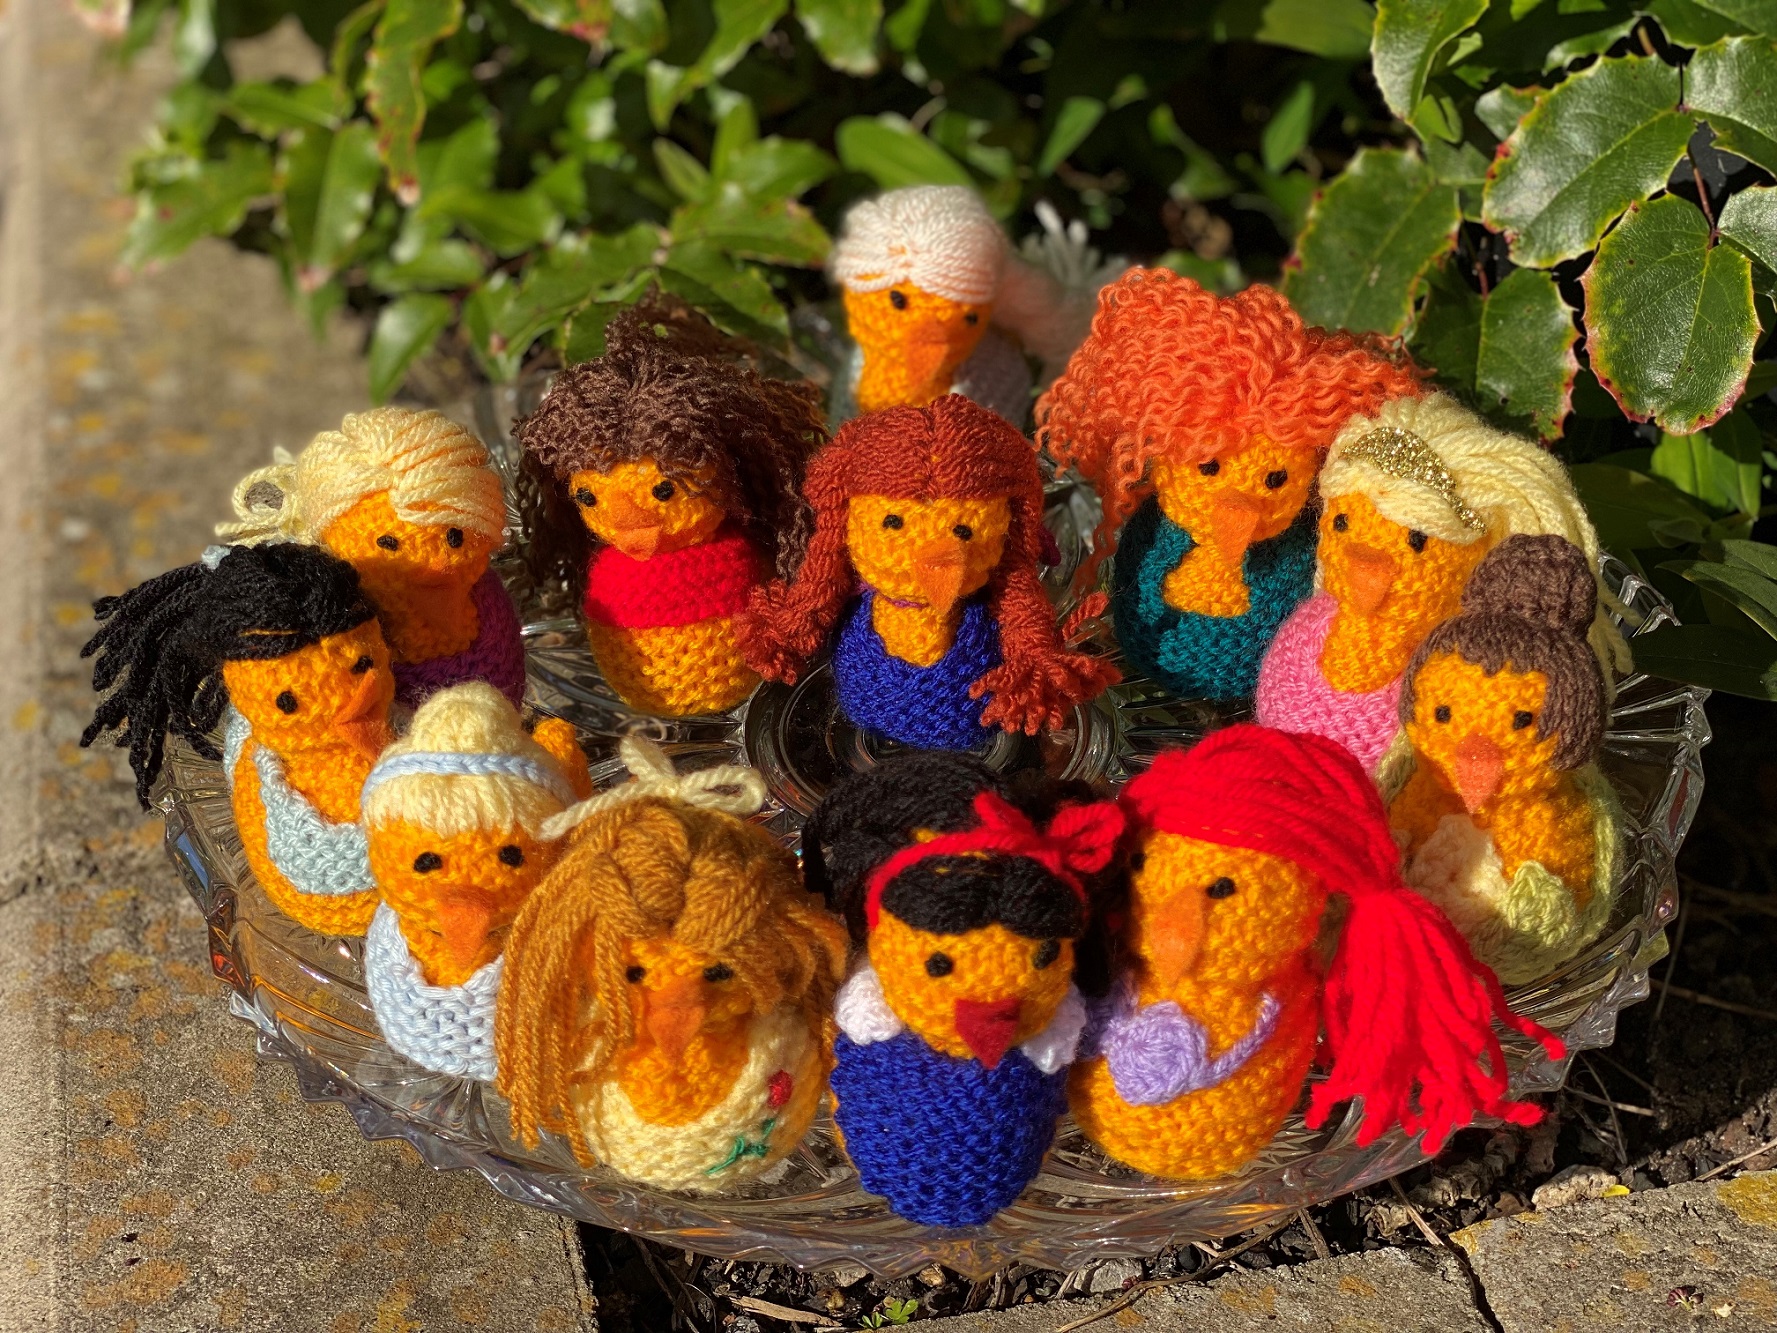 Disney character knitted chicks